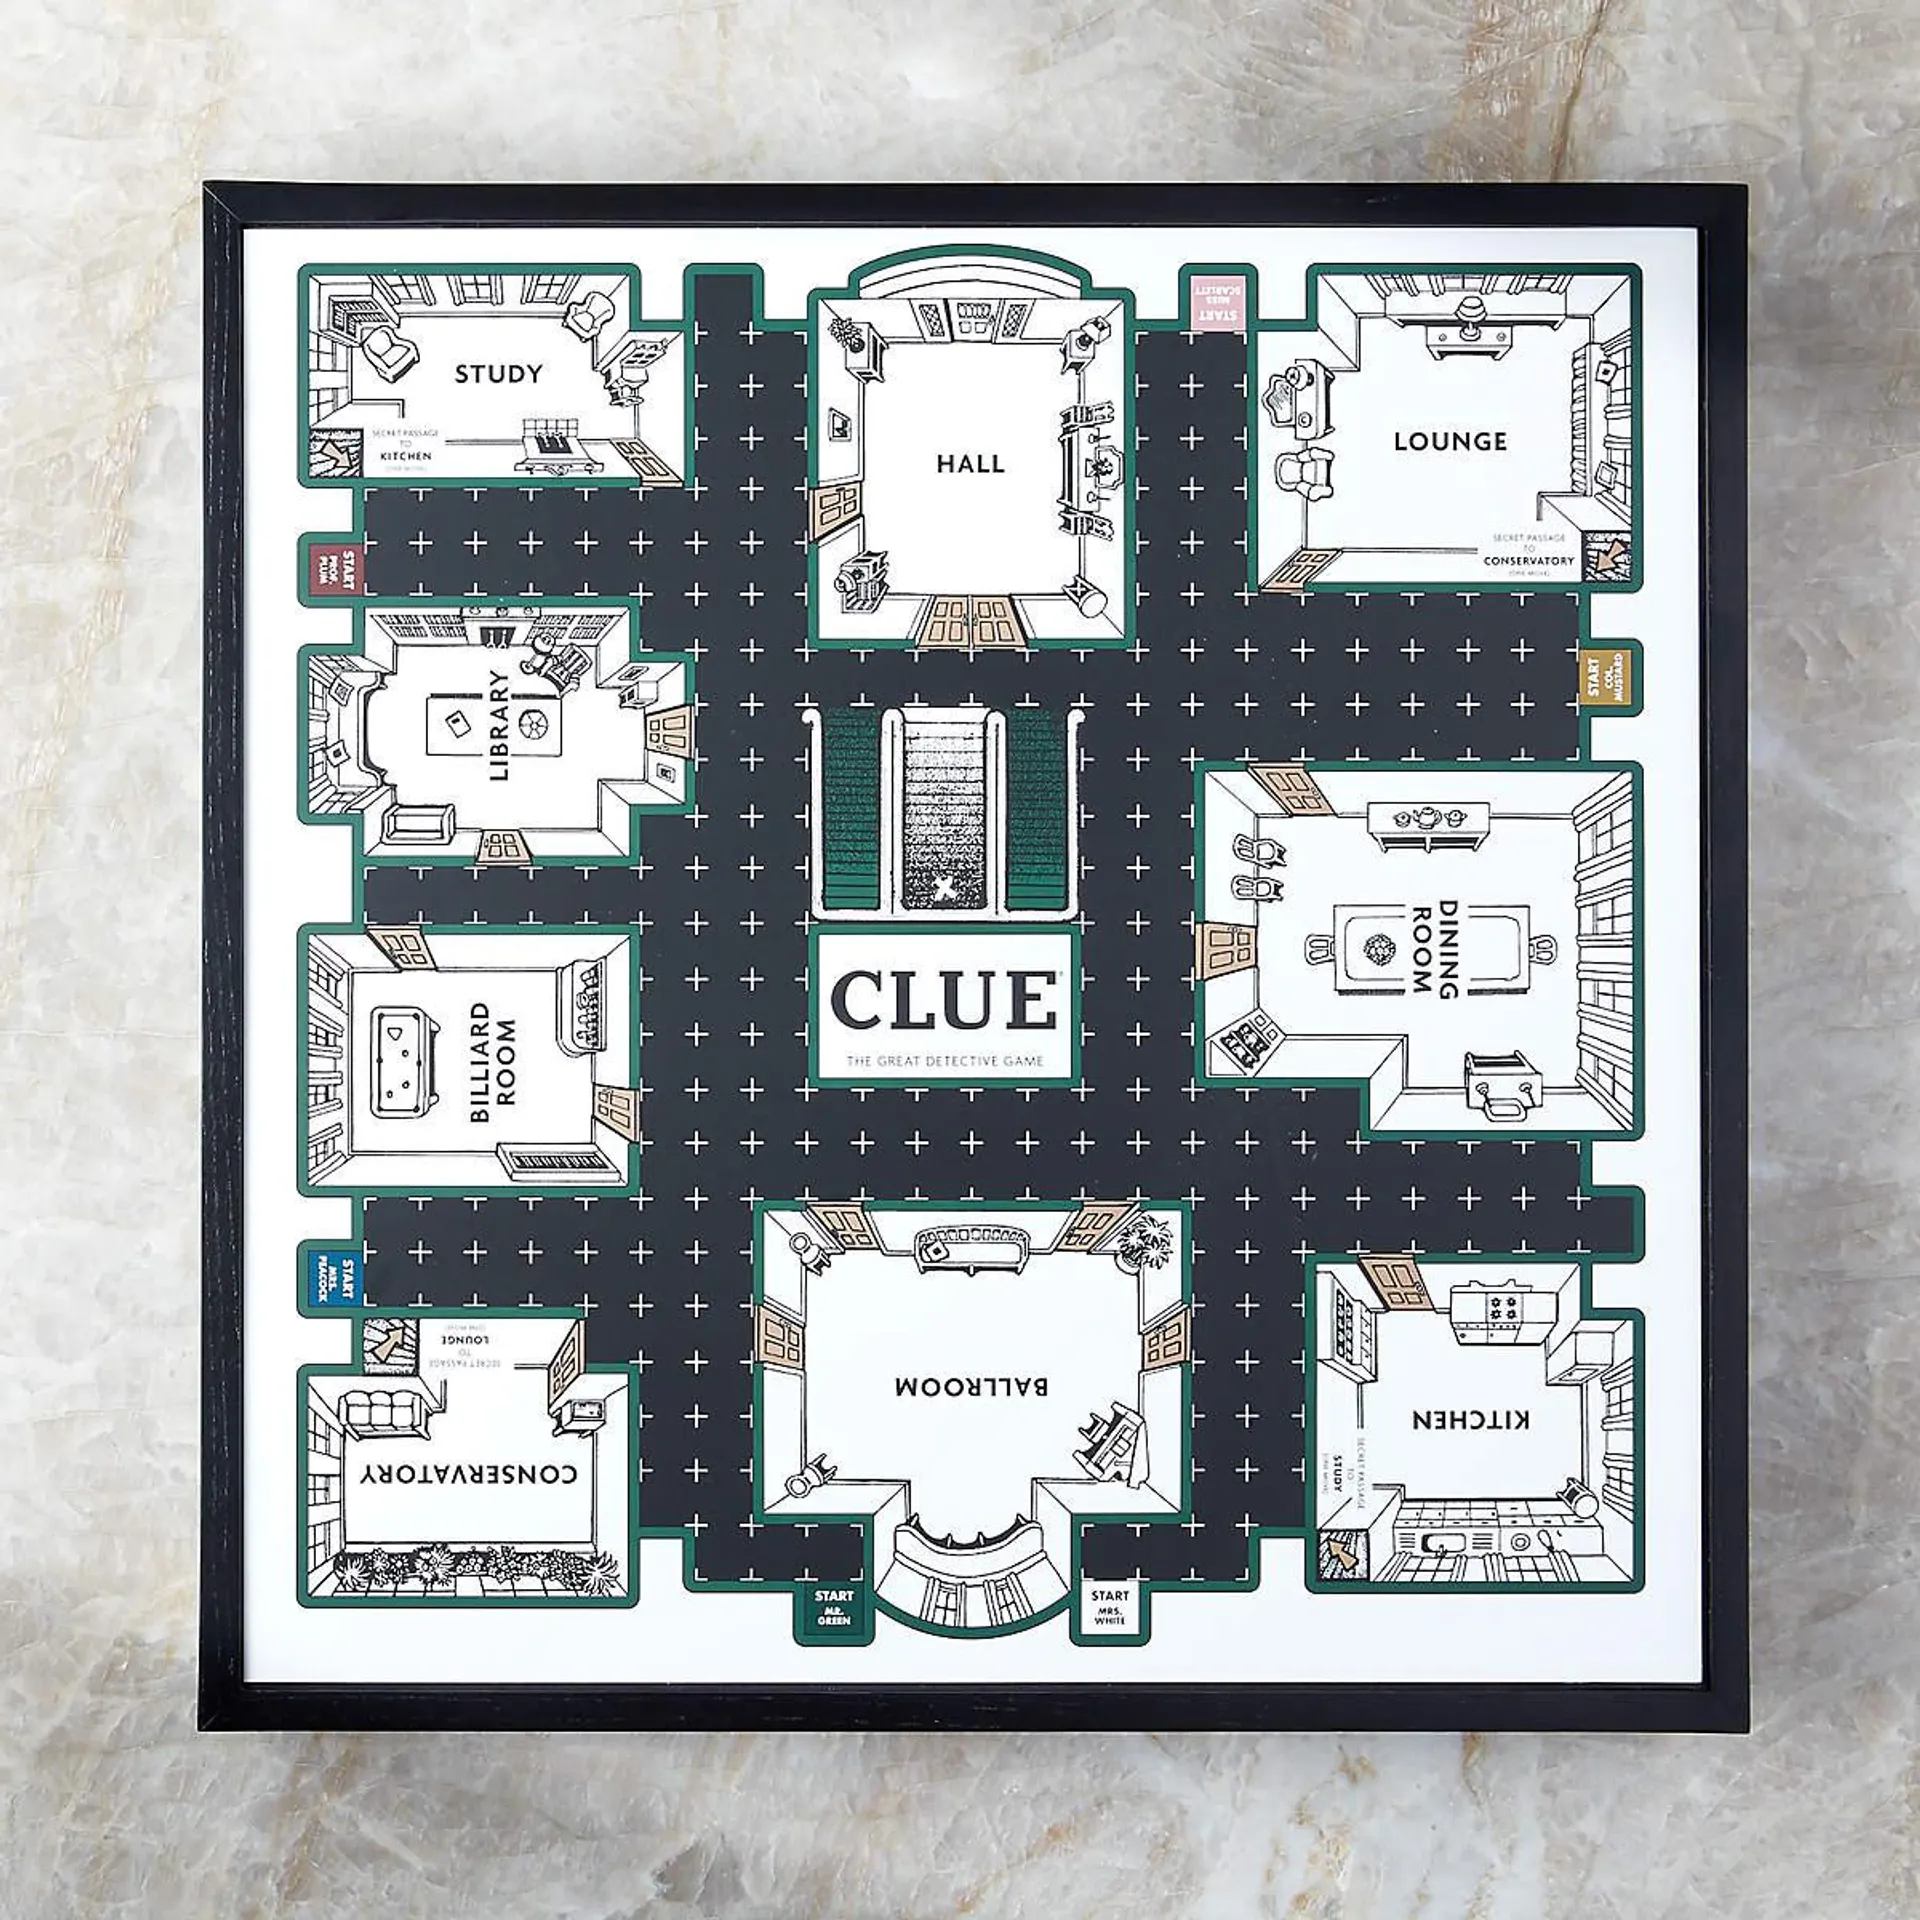 Special Edition Clue ® Game